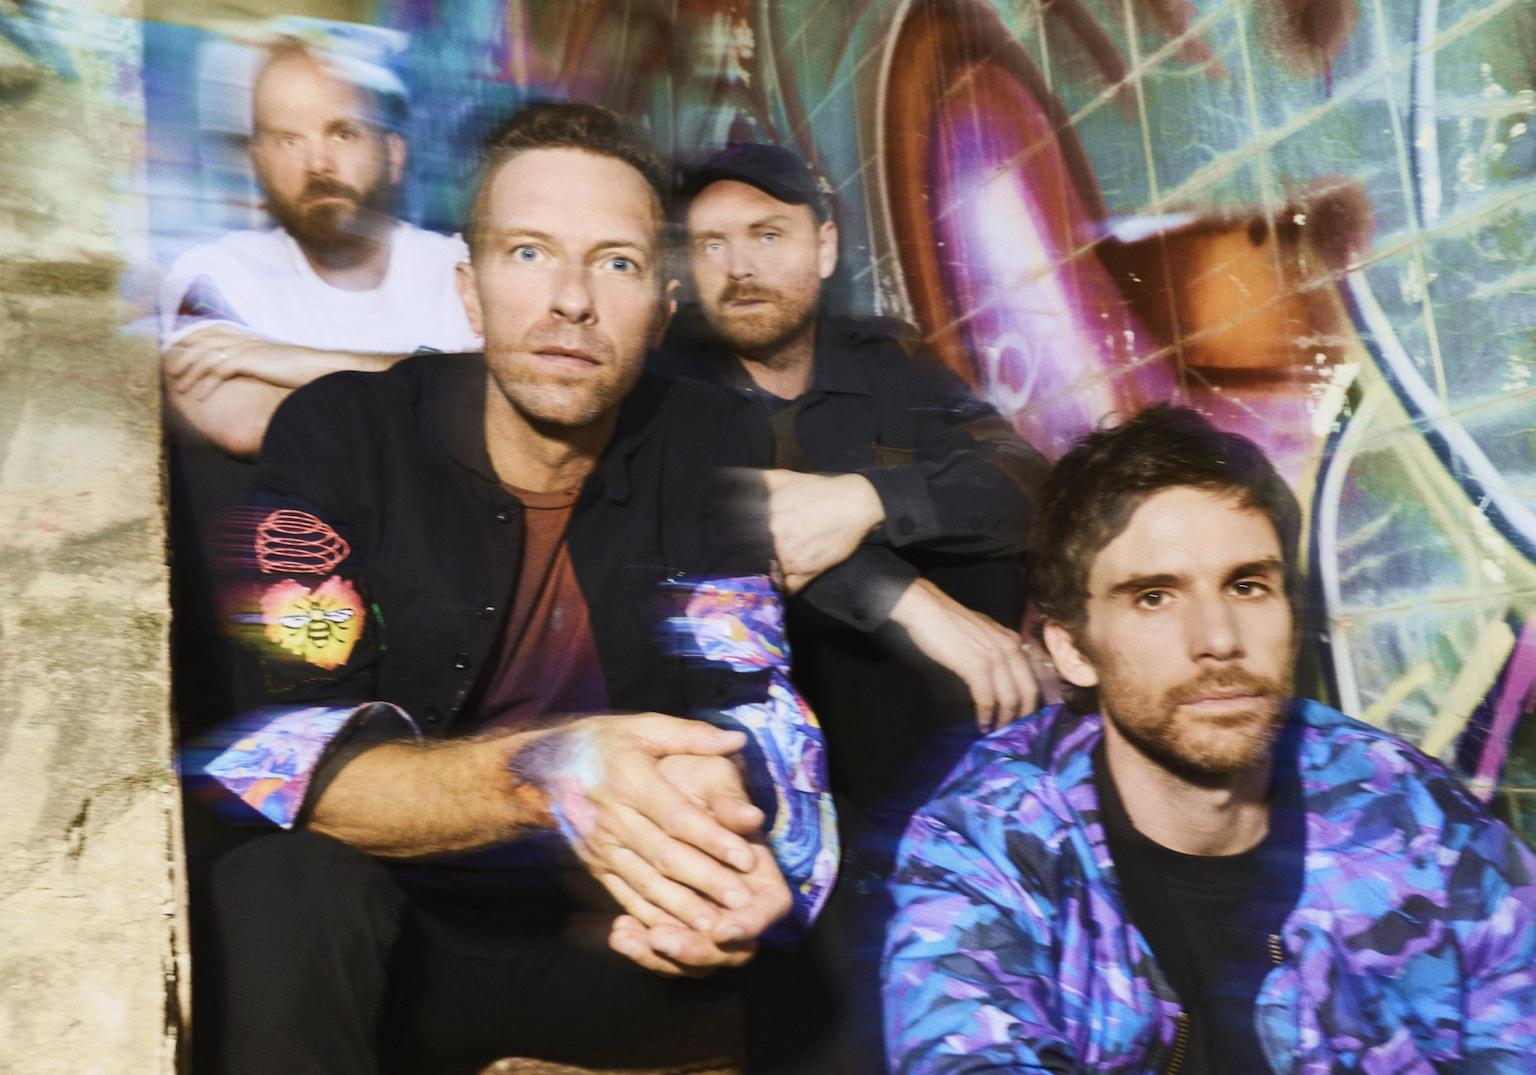 Coldplay returns to CBS. (Image courtesy of CBS)